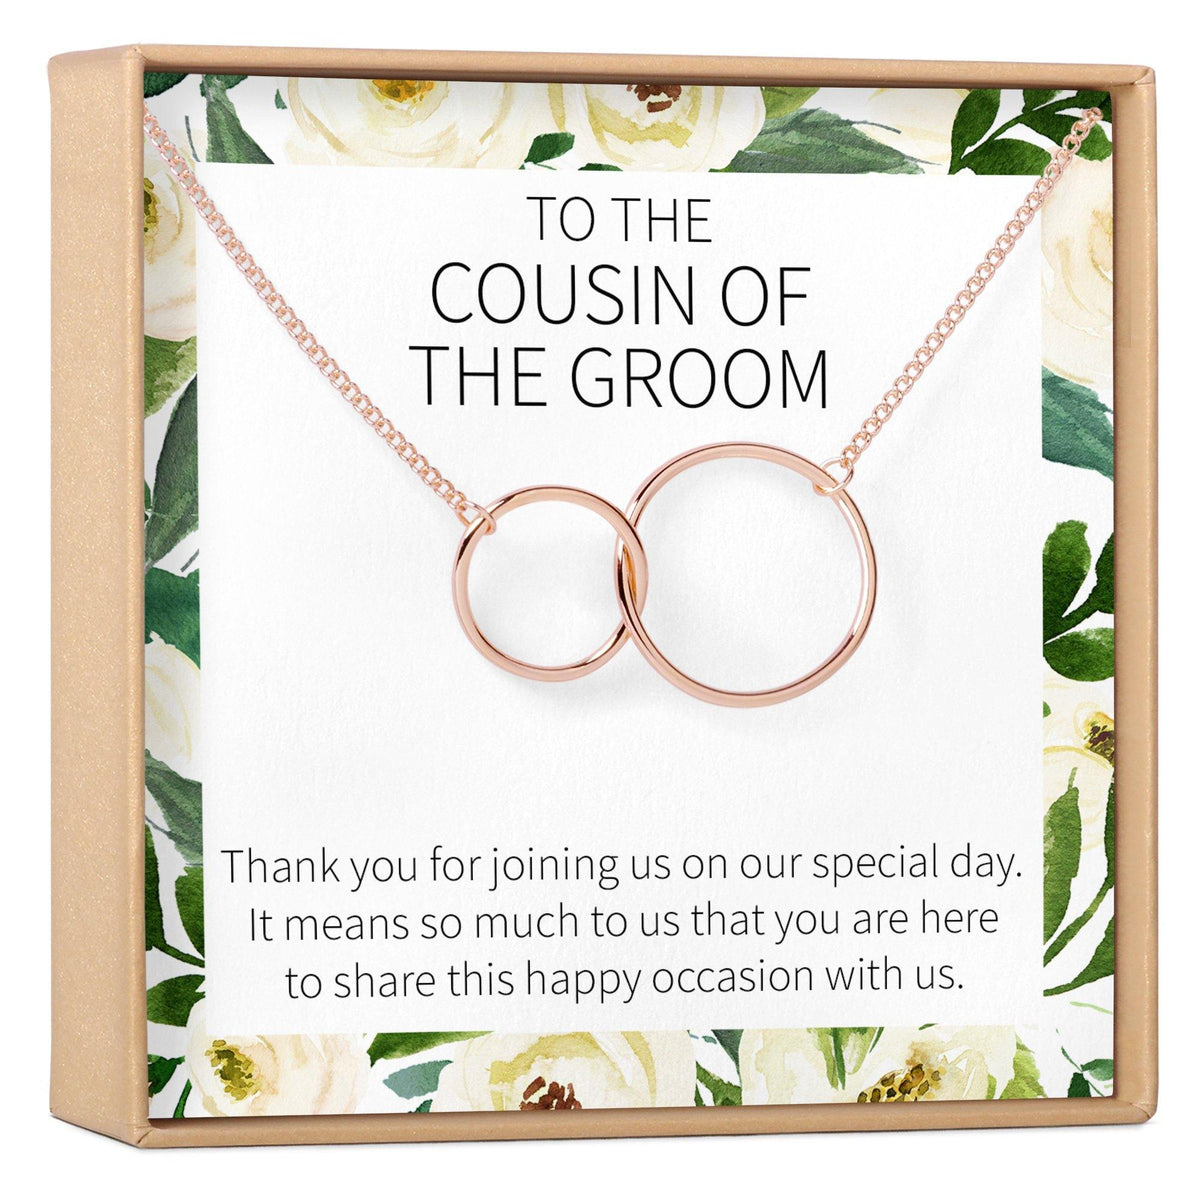 Cousin of the Groom Necklace - Dear Ava, Jewelry / Necklaces / Pendants